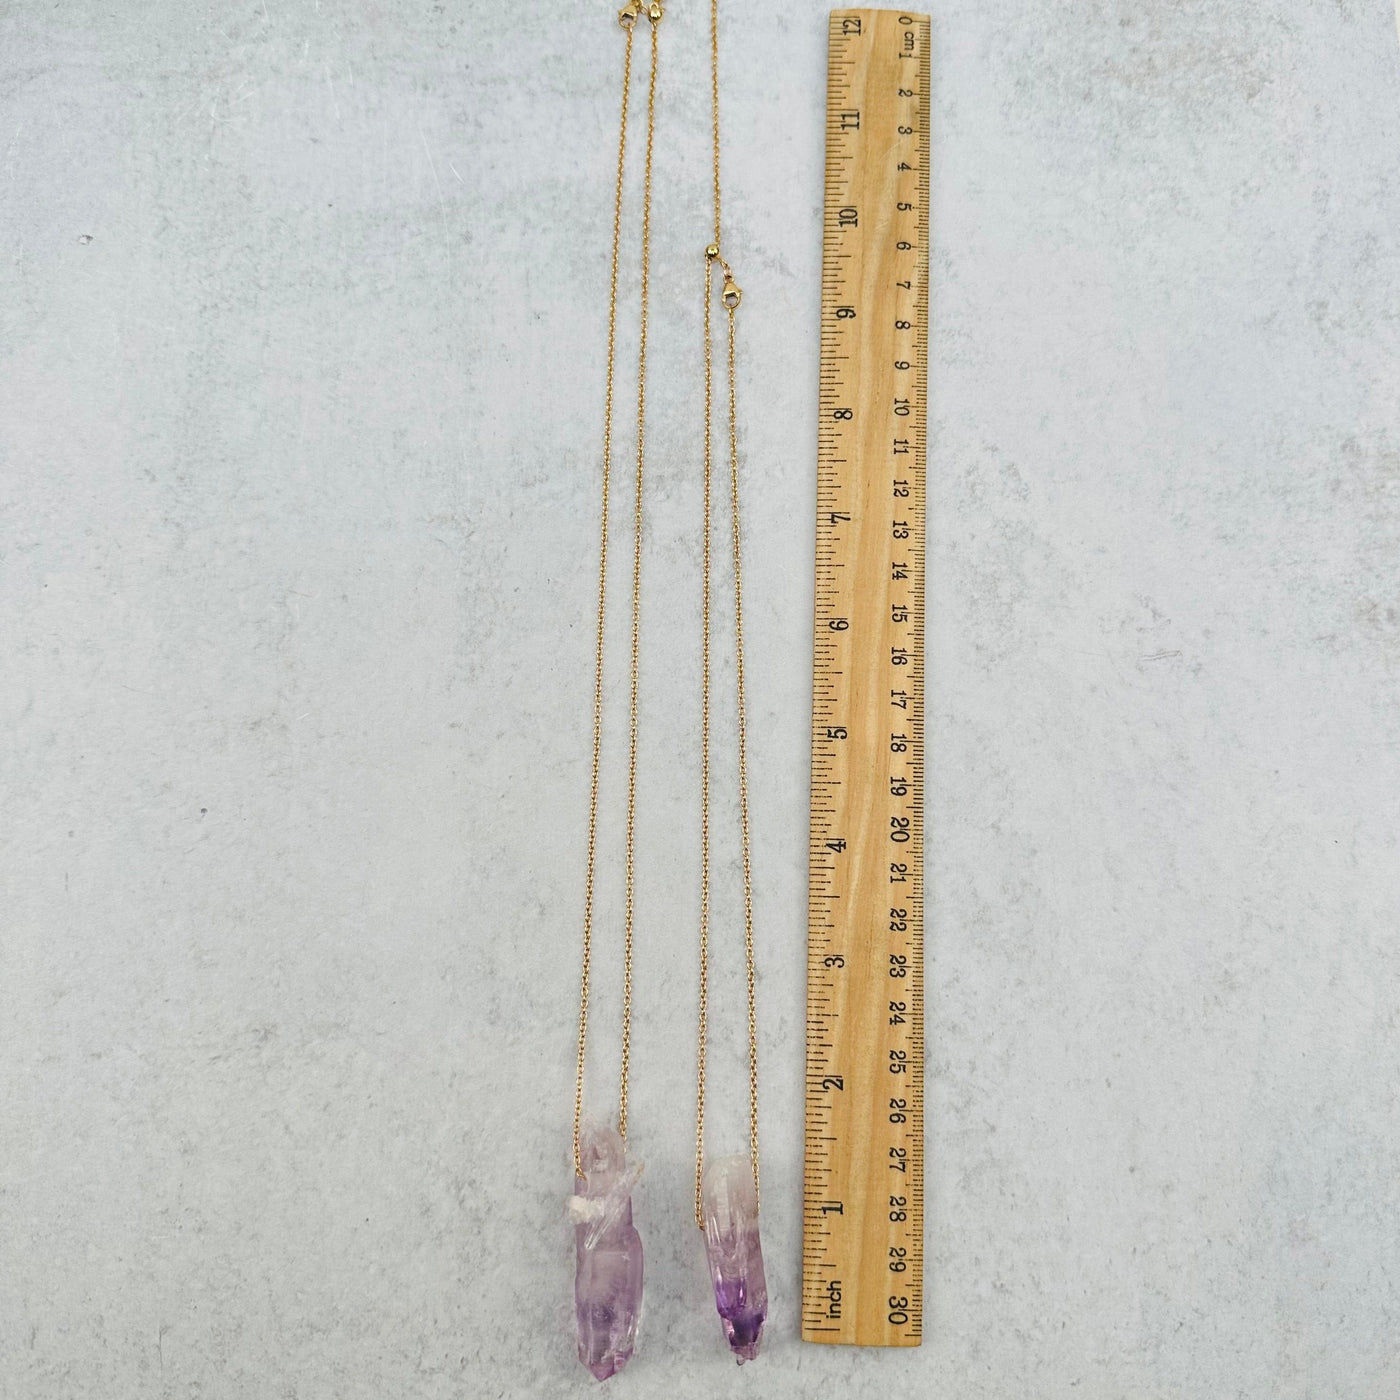 necklace and pendant next to a ruler for size reference 